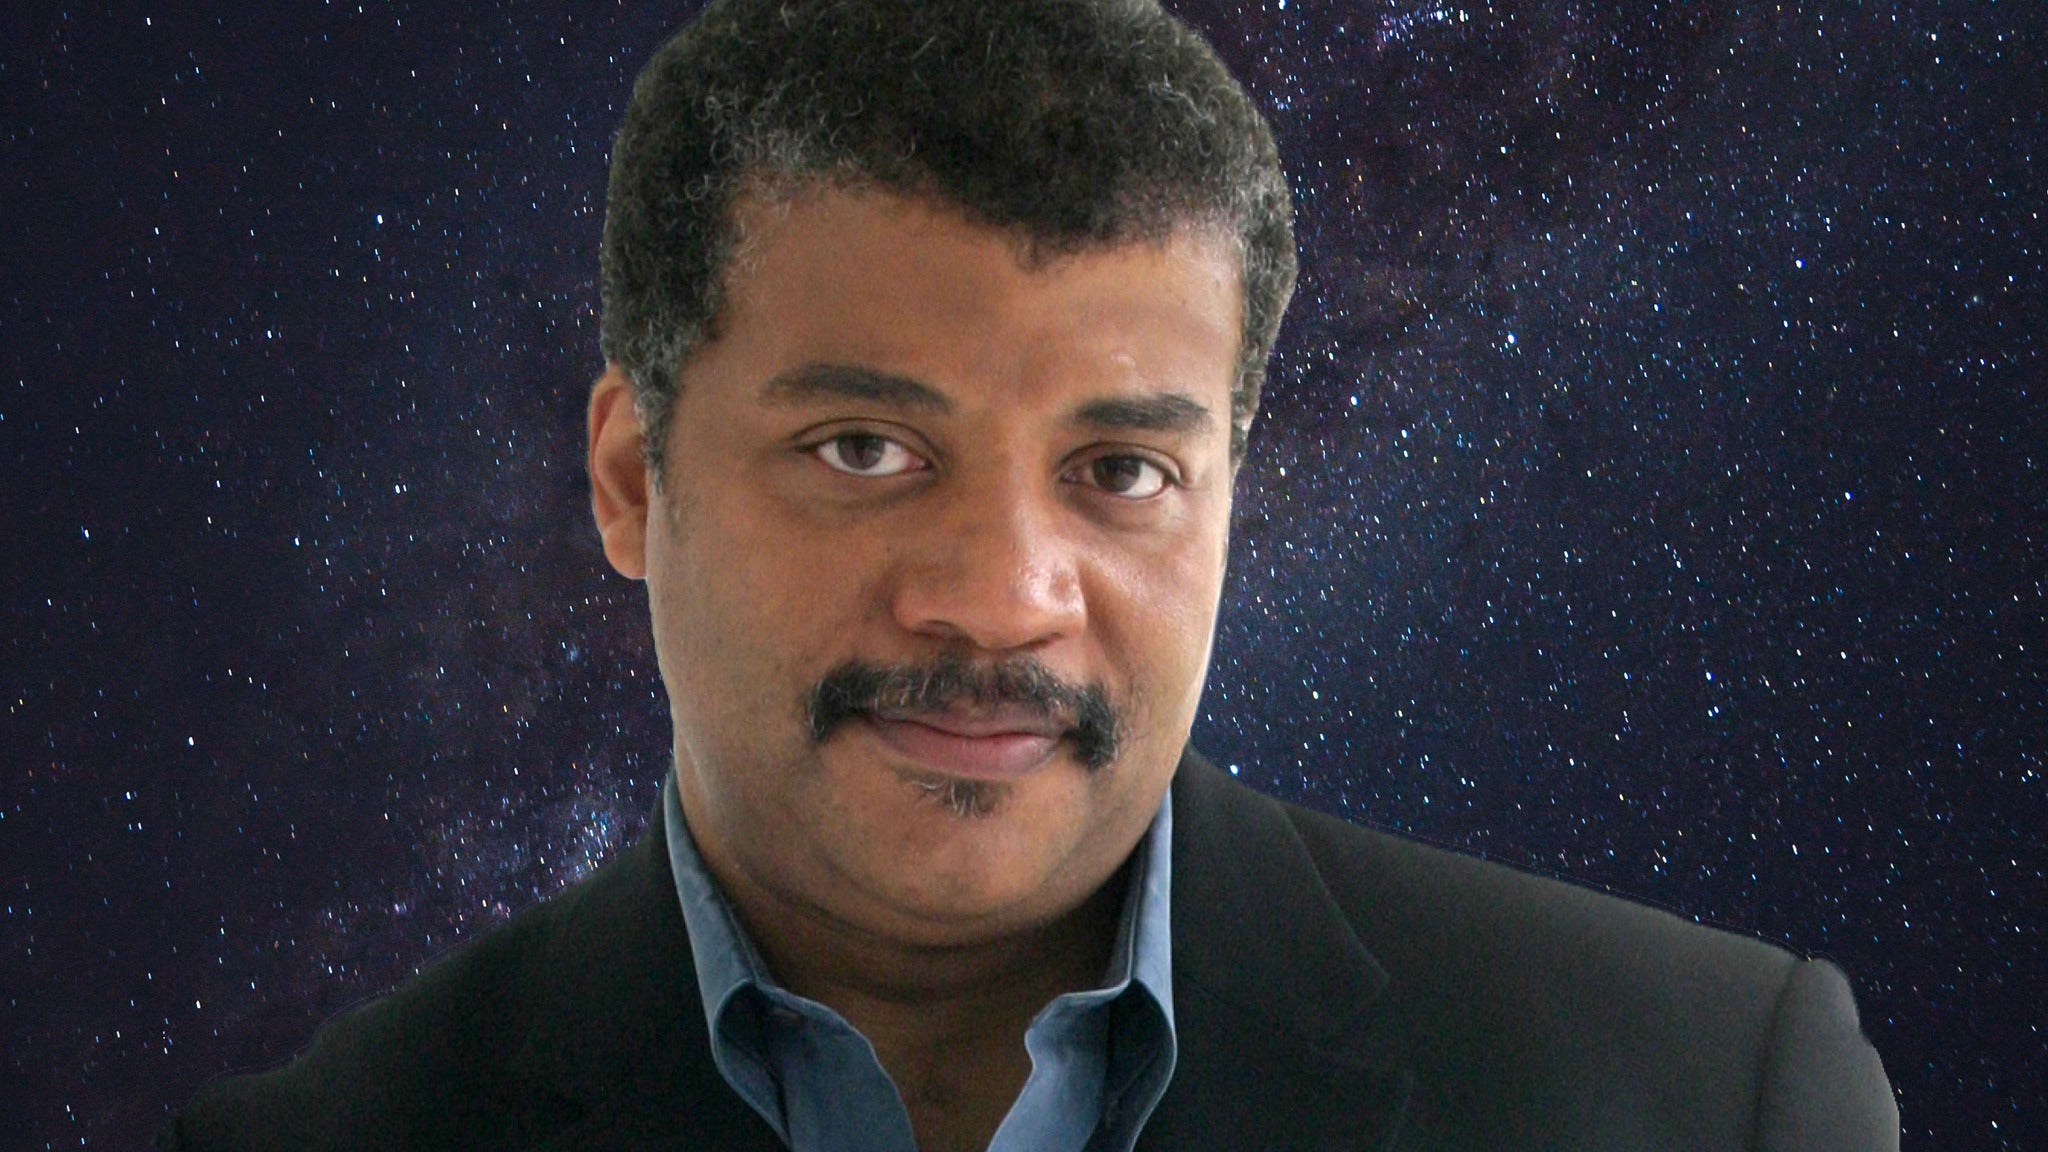 Dr. Neil deGrasse Tyson: An Astrophysicist Goes to the Movies 2